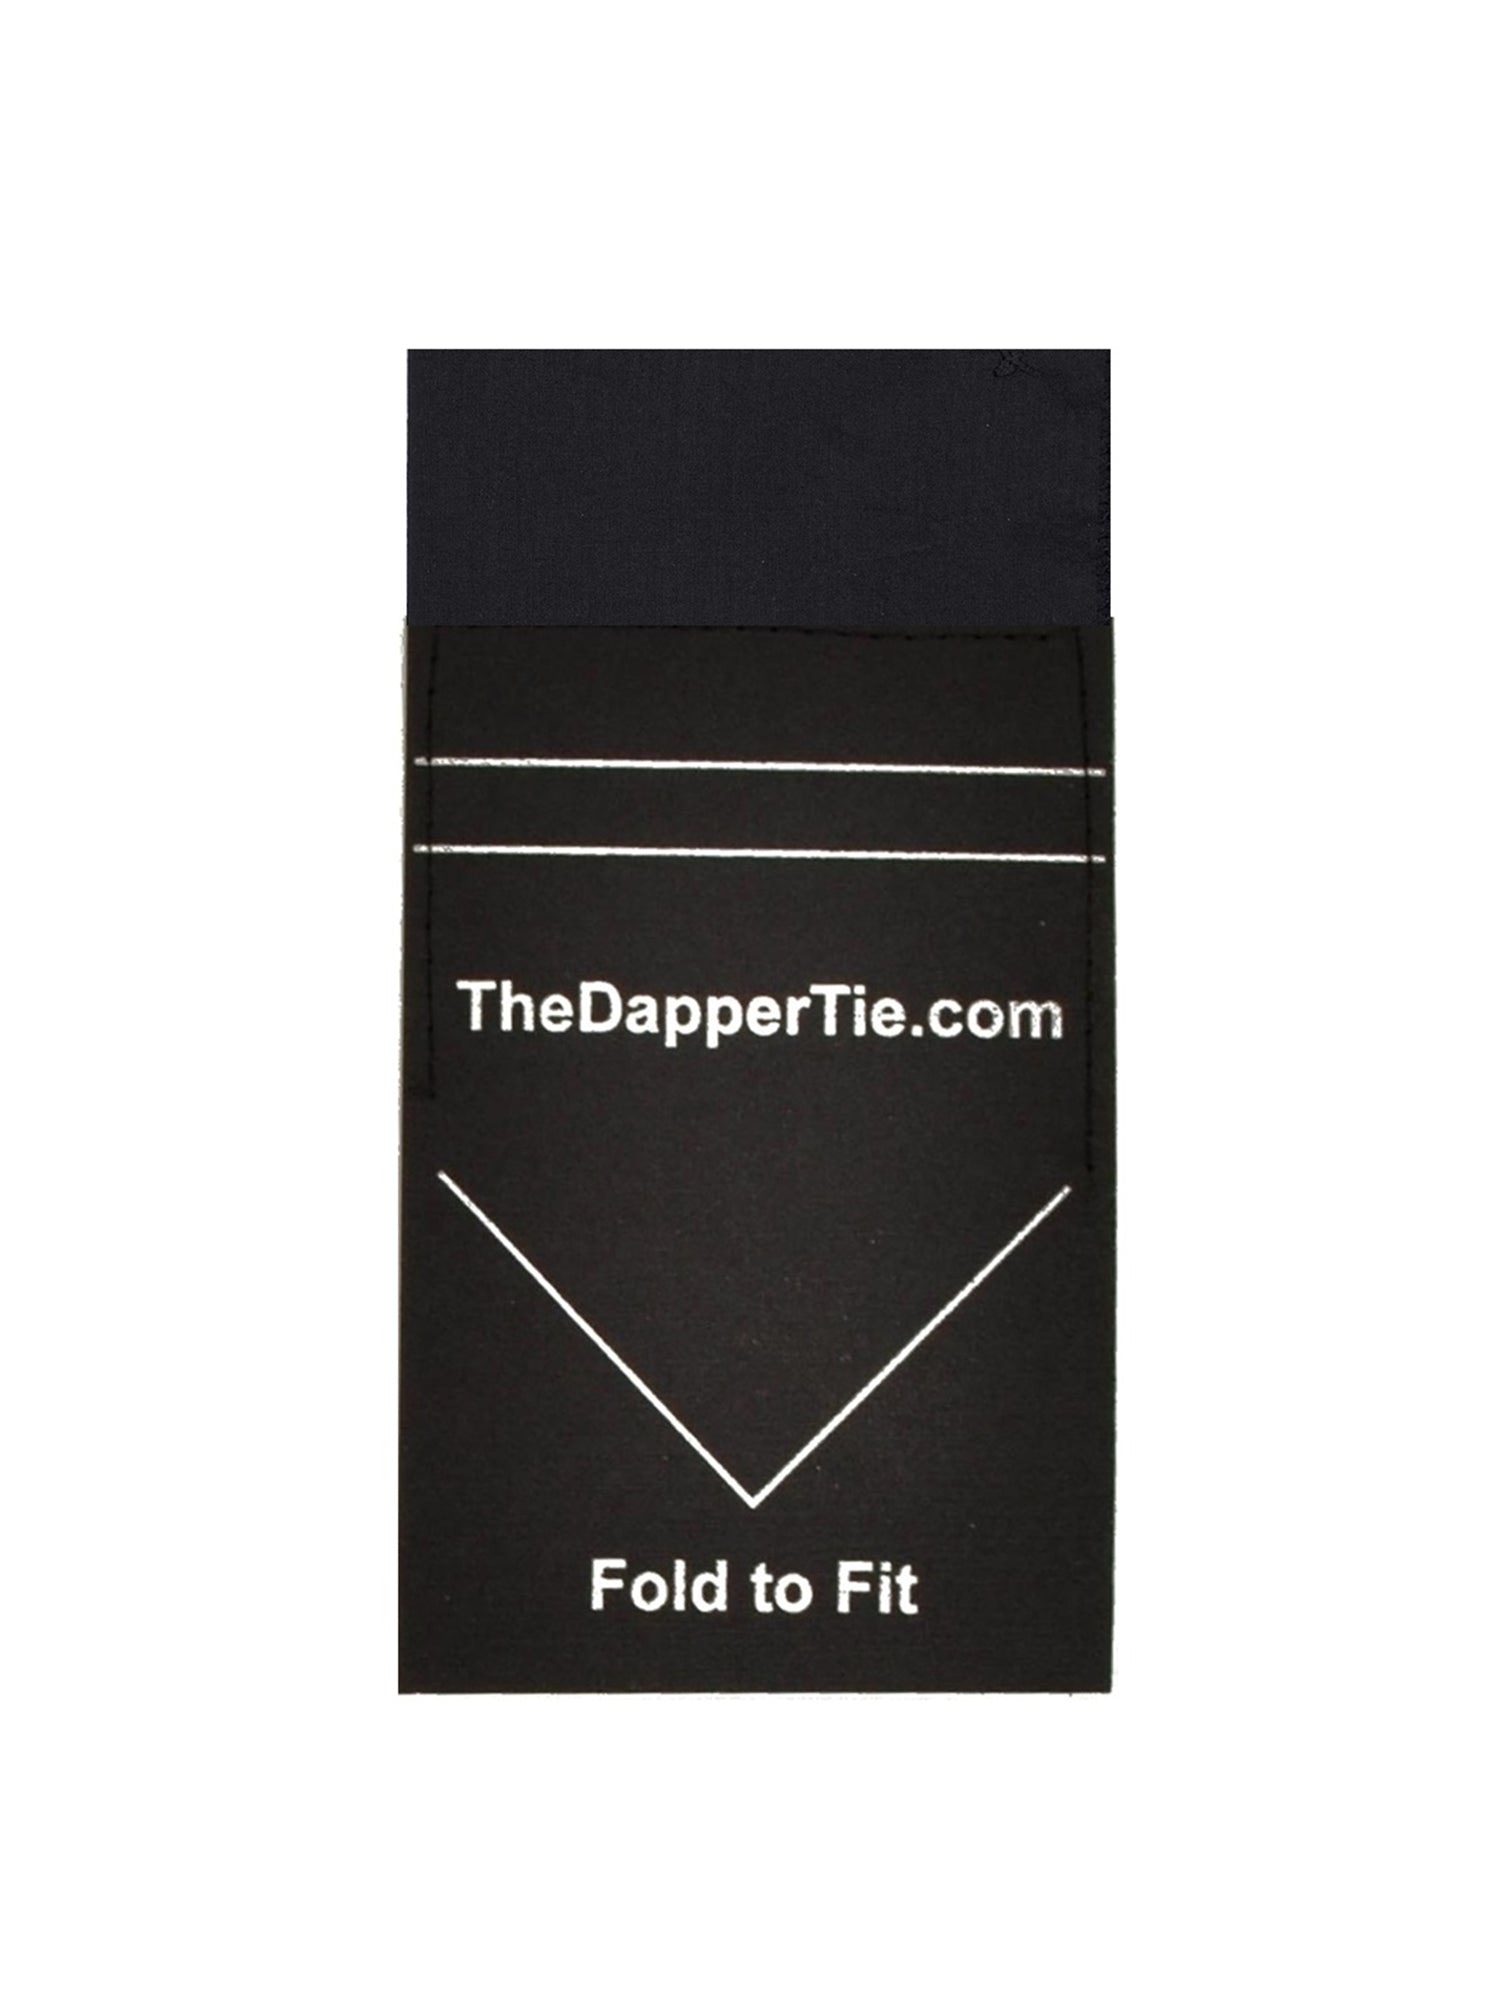 TheDapperTie - Men's Extra Thick Cotton Flat Pre Folded Pocket Square on Card Prefolded Pocket Squares TheDapperTie Black Regular 